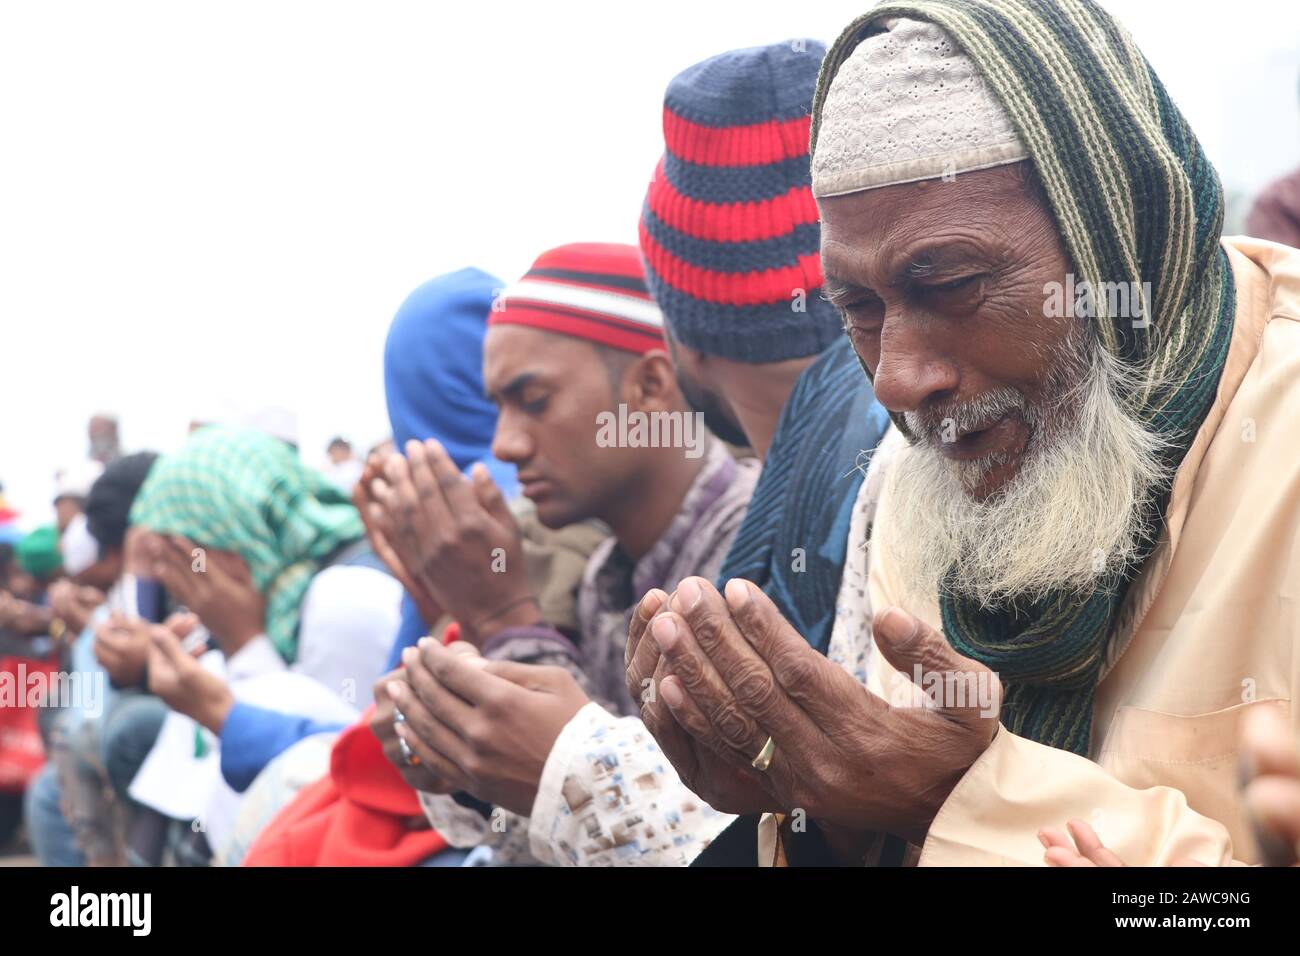 Jan. 2020 - Gazipur, Bangladesh - Muslim devotees gathered in Bishwa Istema at Tongi, Gazipur for the last day of second phase of the event which is t Stock Photo